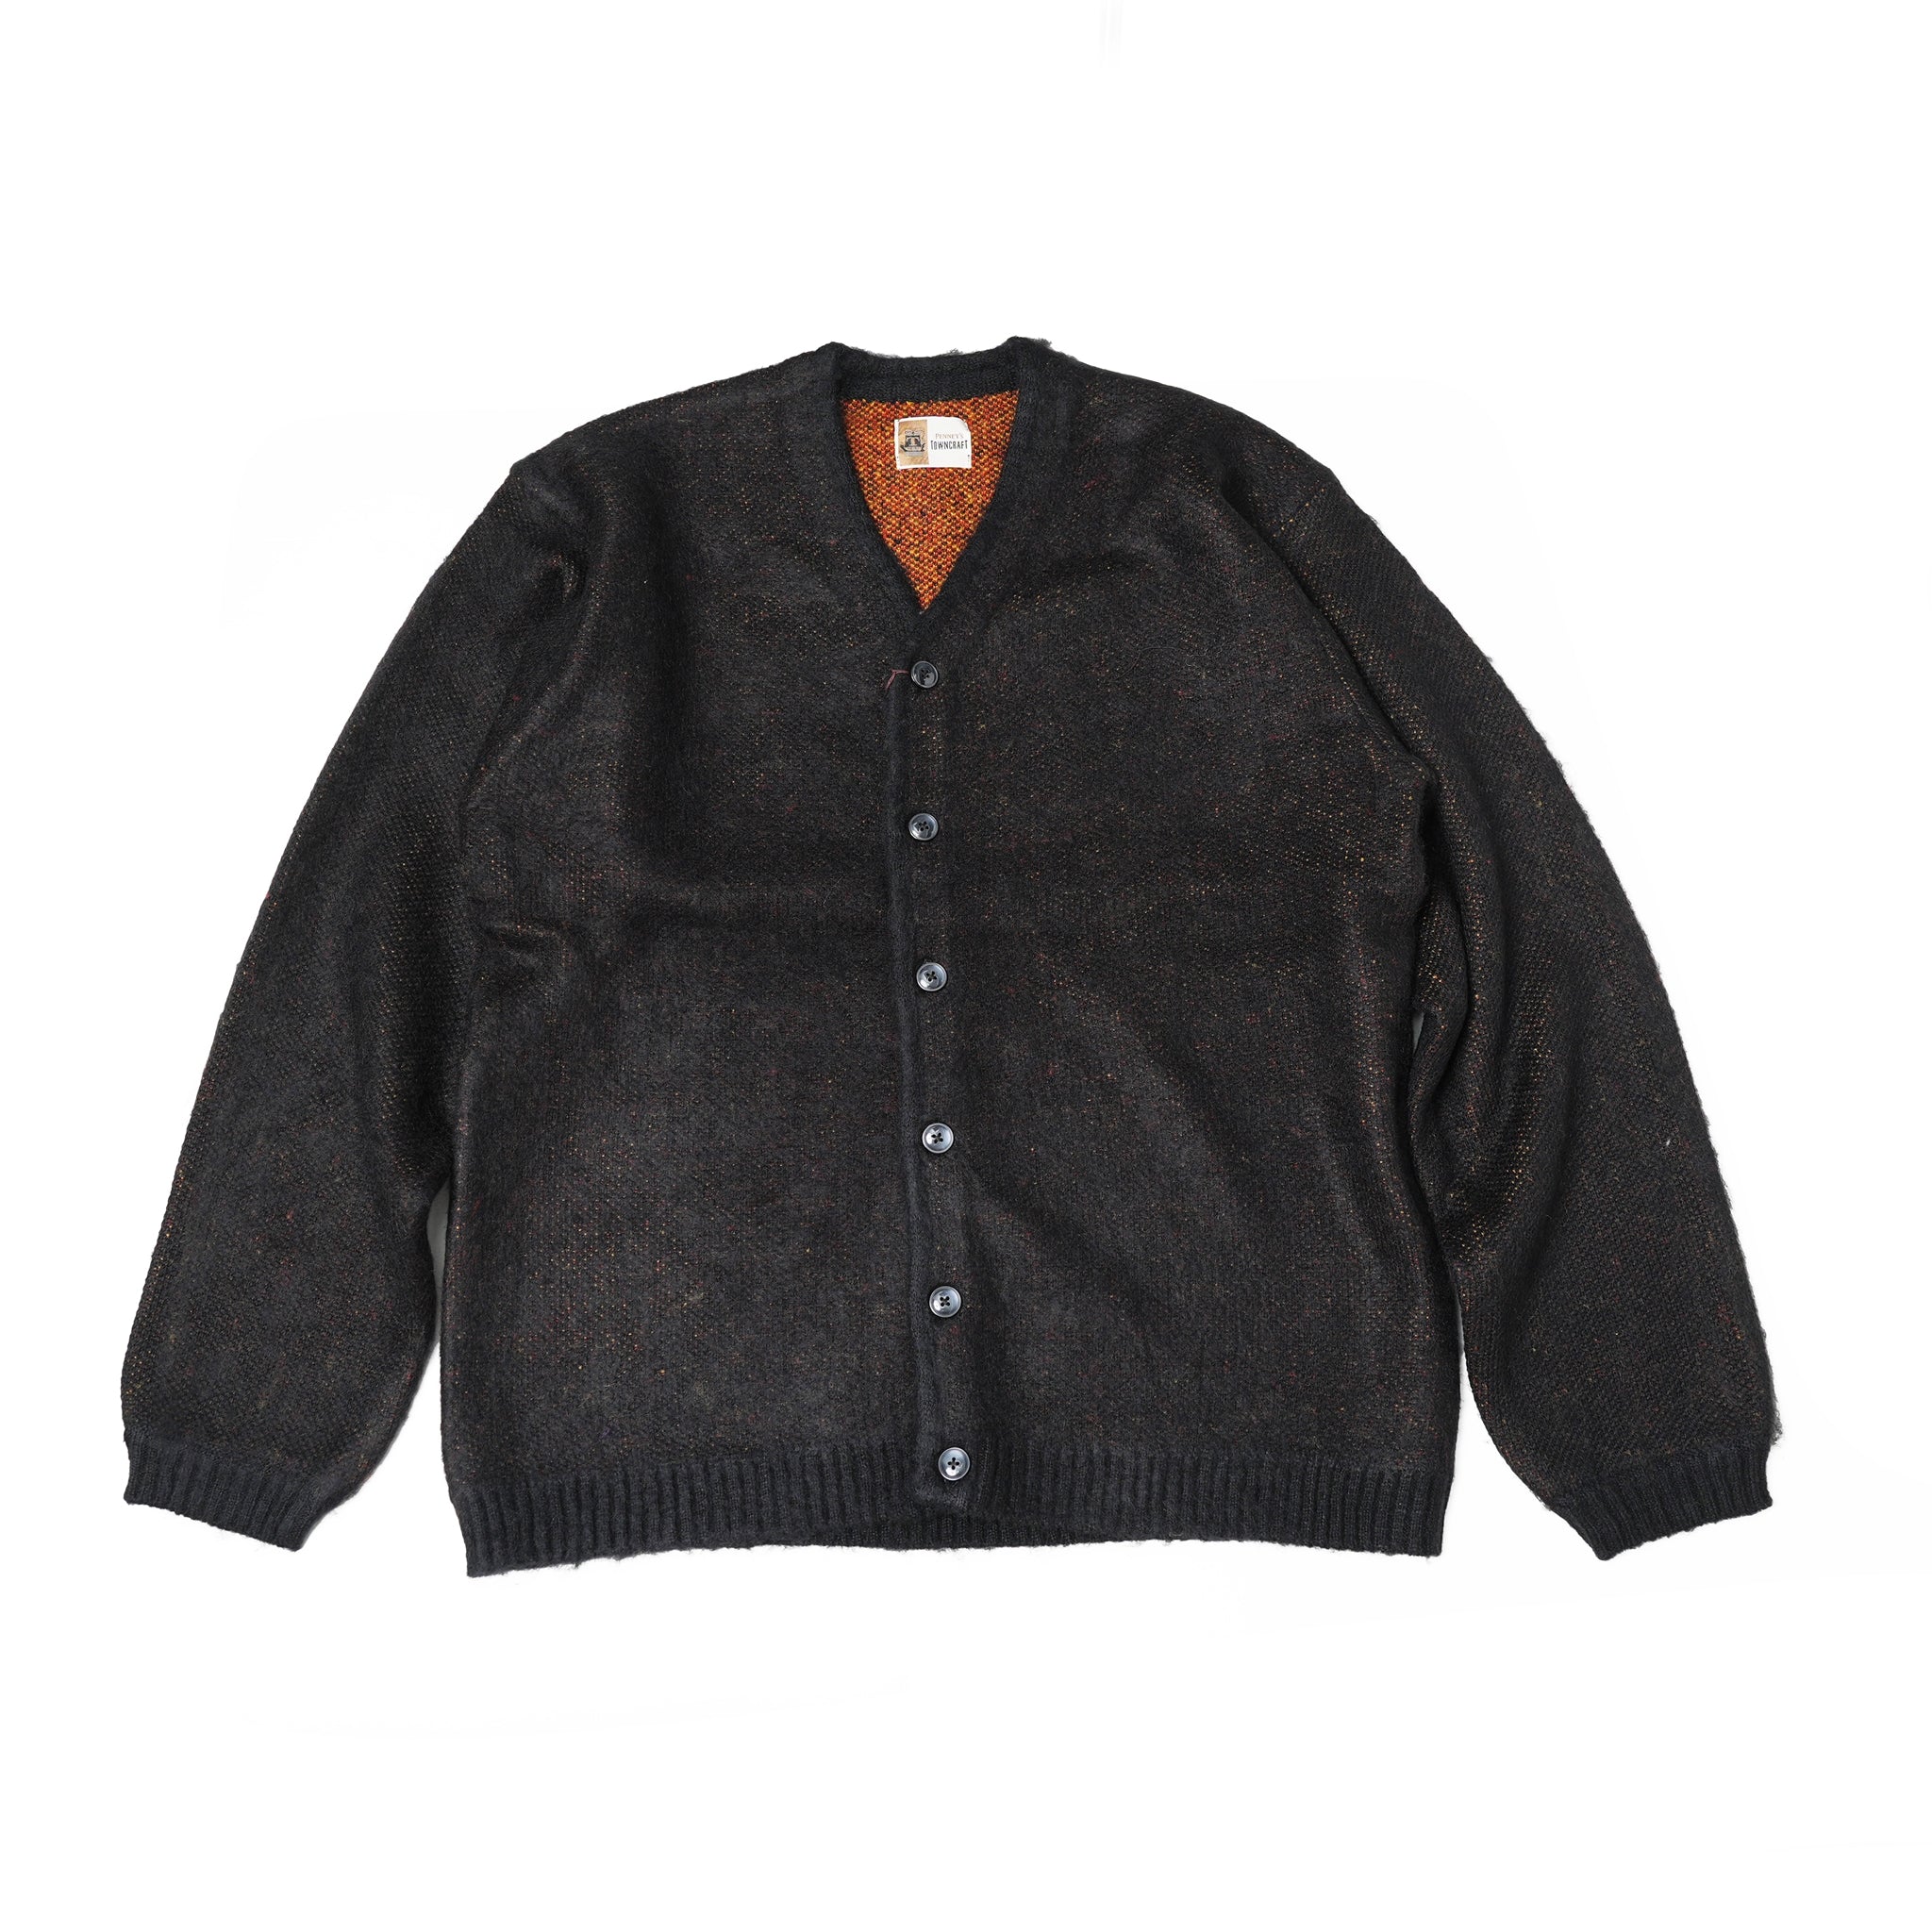 No:tc23f014a | Name:shaggy color cardigan | Color:Black【TOWNCRAFT_タウンクラフト】